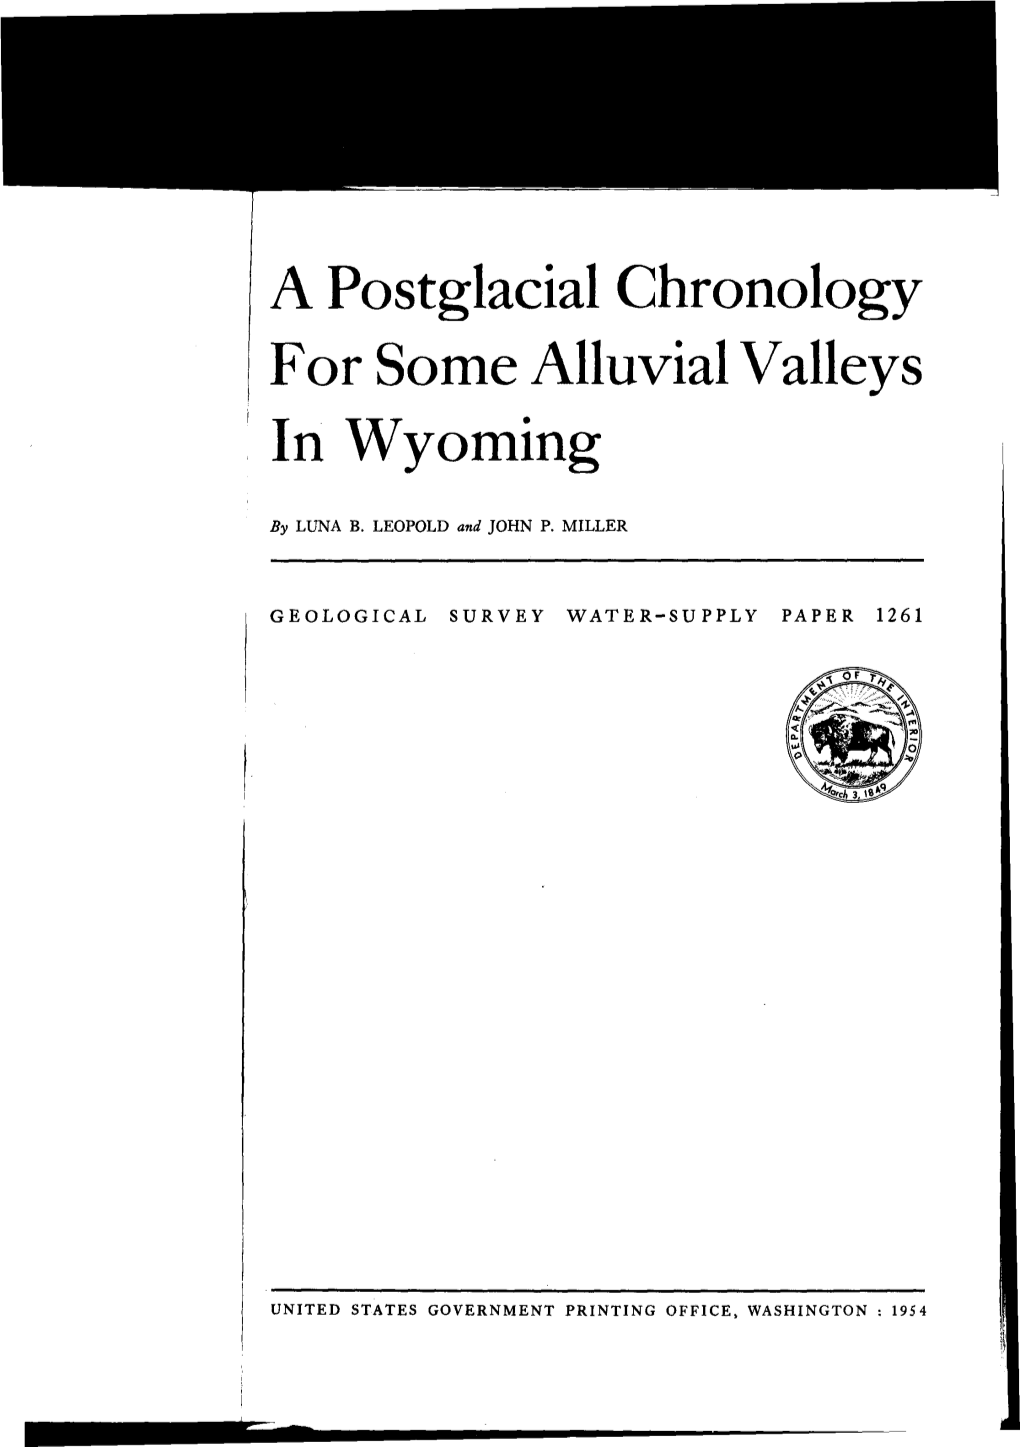 A Postglacial Chronology for Some Alluvial Valleys in Wyoming